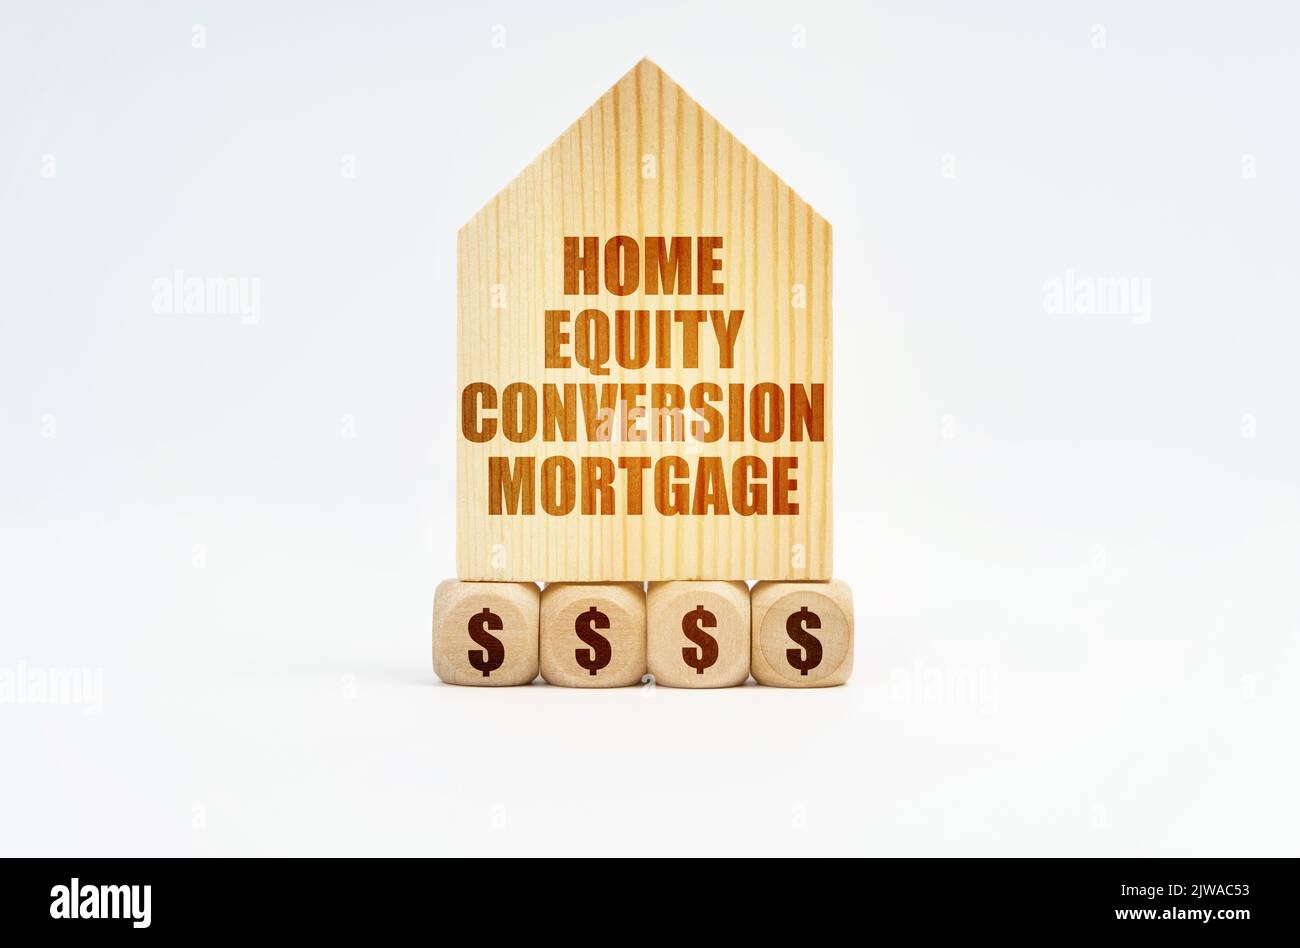 On a white surface stands a wooden model of a house with the inscription - Home Equity Conversion Mortgage Stock Photo